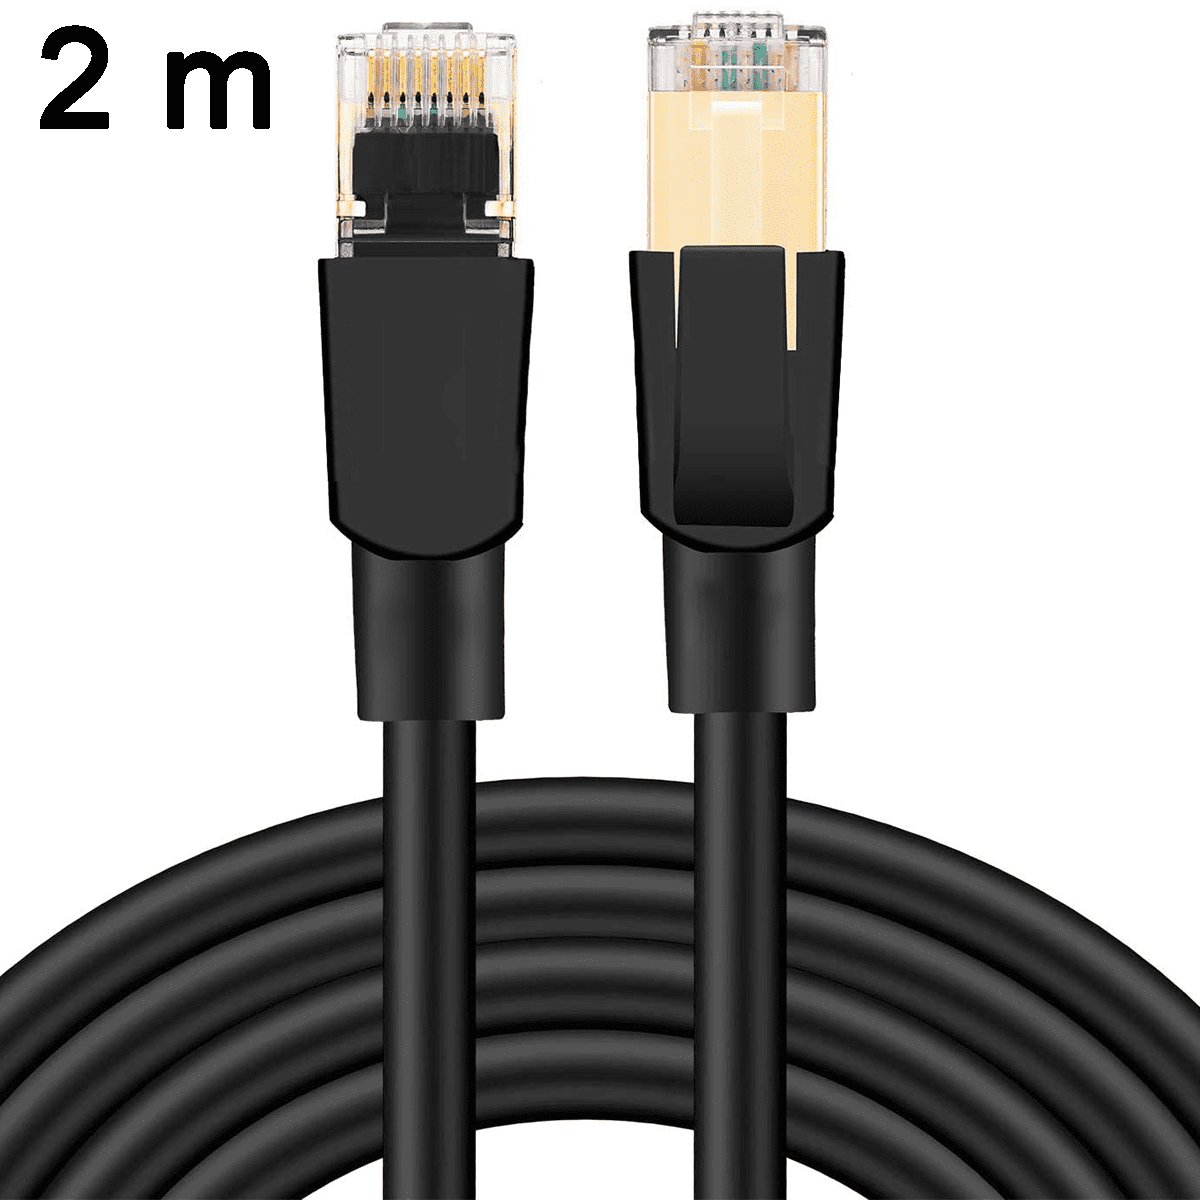 Gaming White High Speed Cat8 Internet WiFi Cable 40 Gbps 2000 Mhz RJ45 Connector with Gold Plated 100 feet Weatherproof LAN Patch Cord Cable for Router PC Cat 8 Ethernet Cable 100ft